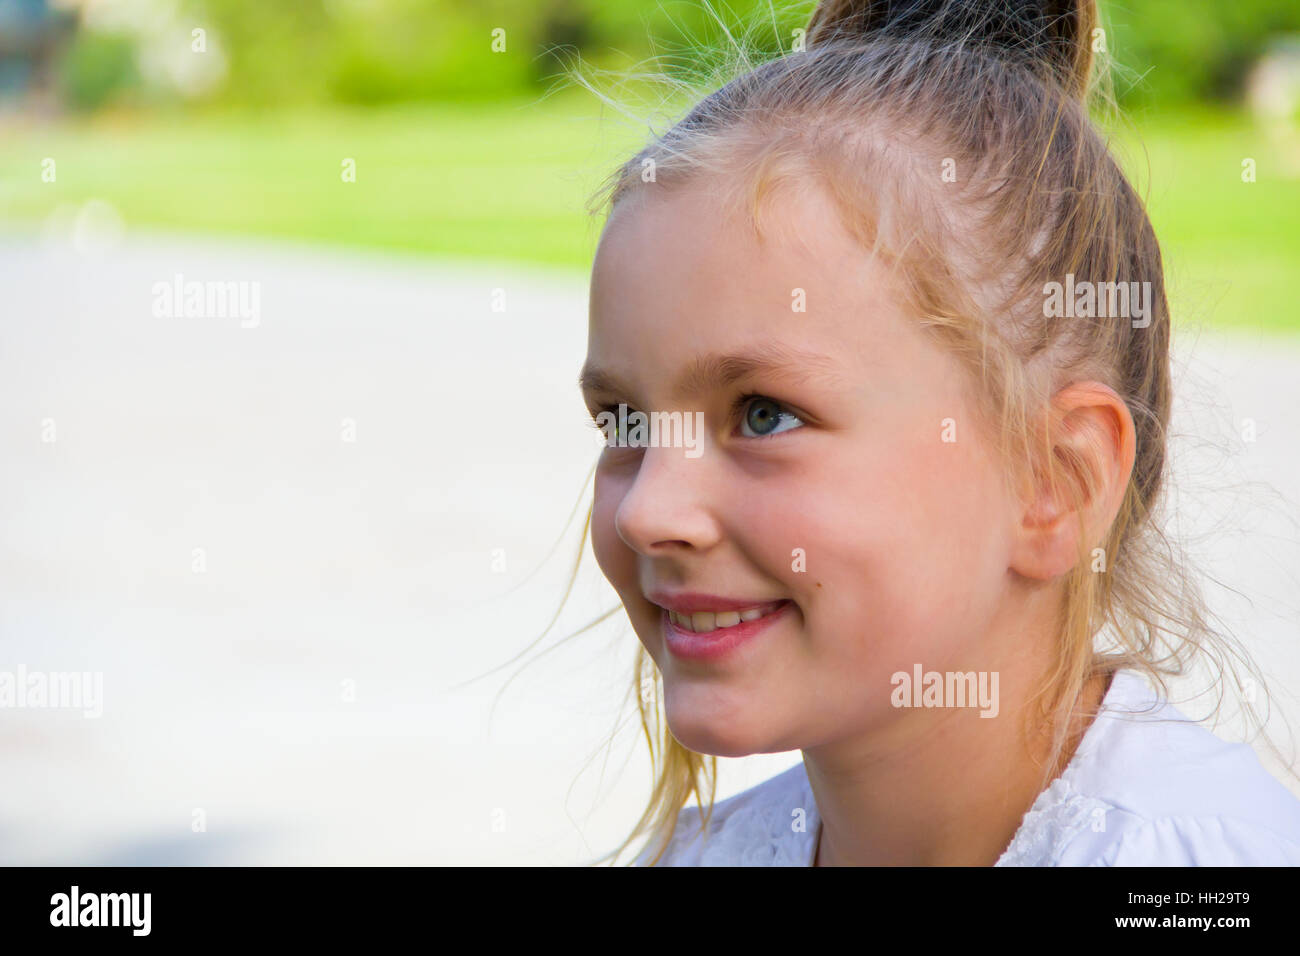 Photo of cute girl with big blue eyes Stock Photo